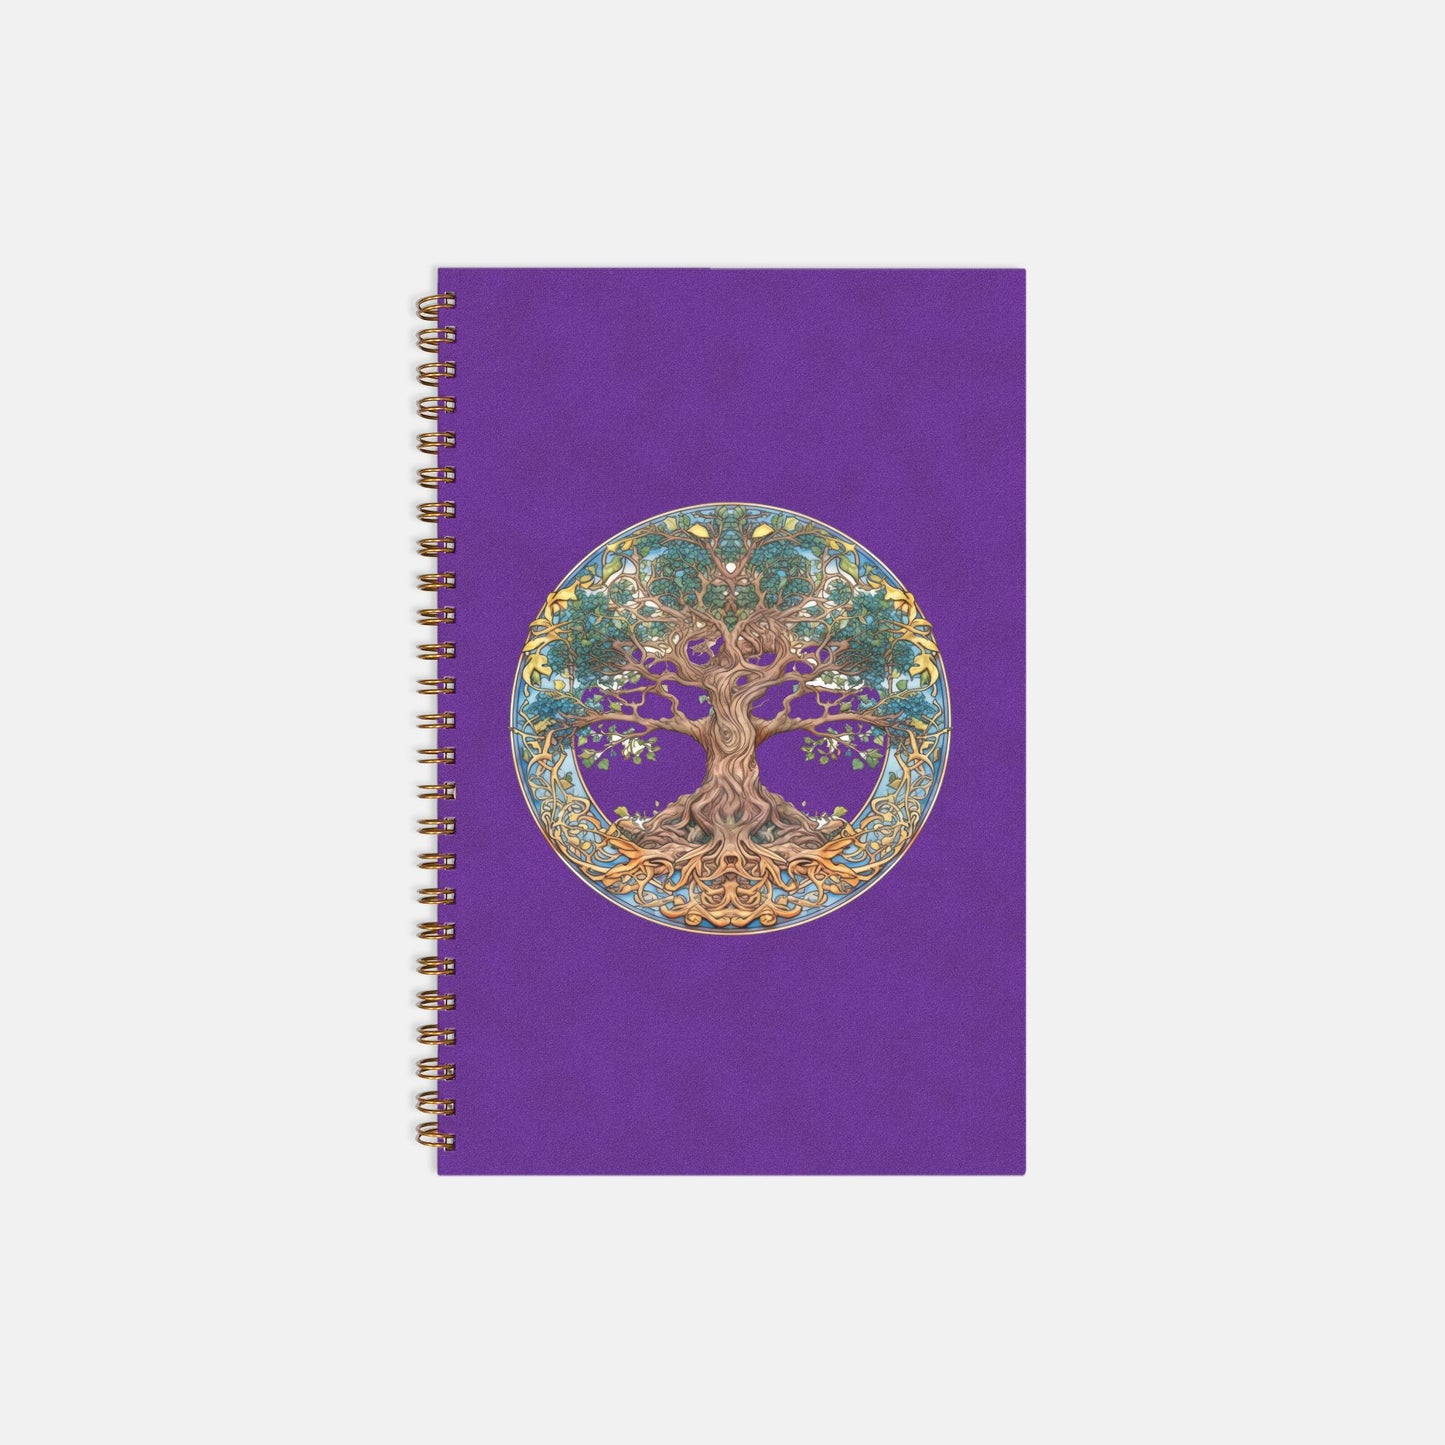 Purple Tree of Life journal Notebook Hardcover Spiral 5.5 x 8.5